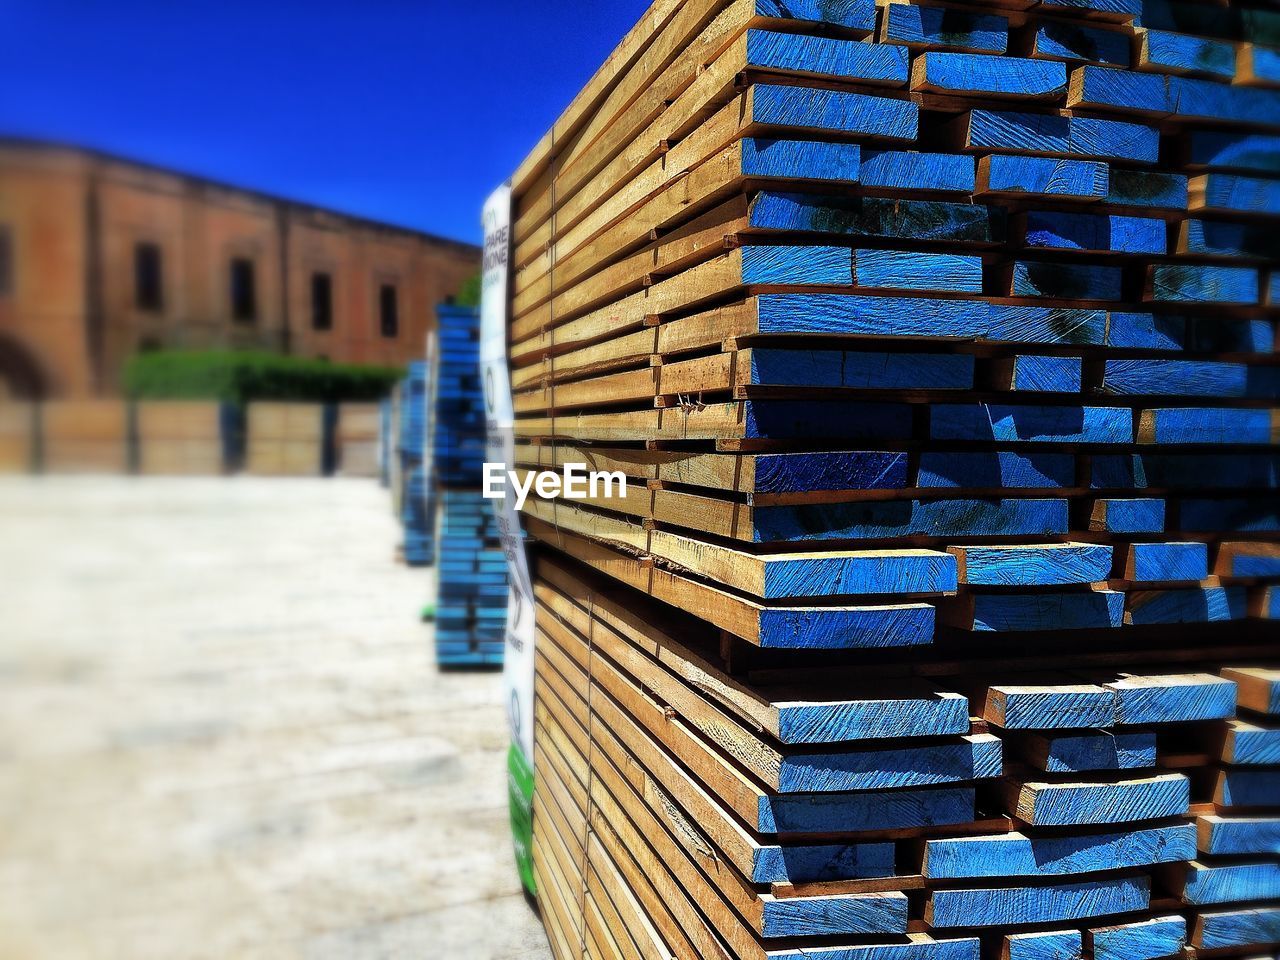 CLOSE-UP OF STACK OF FIREWOOD BUILDING